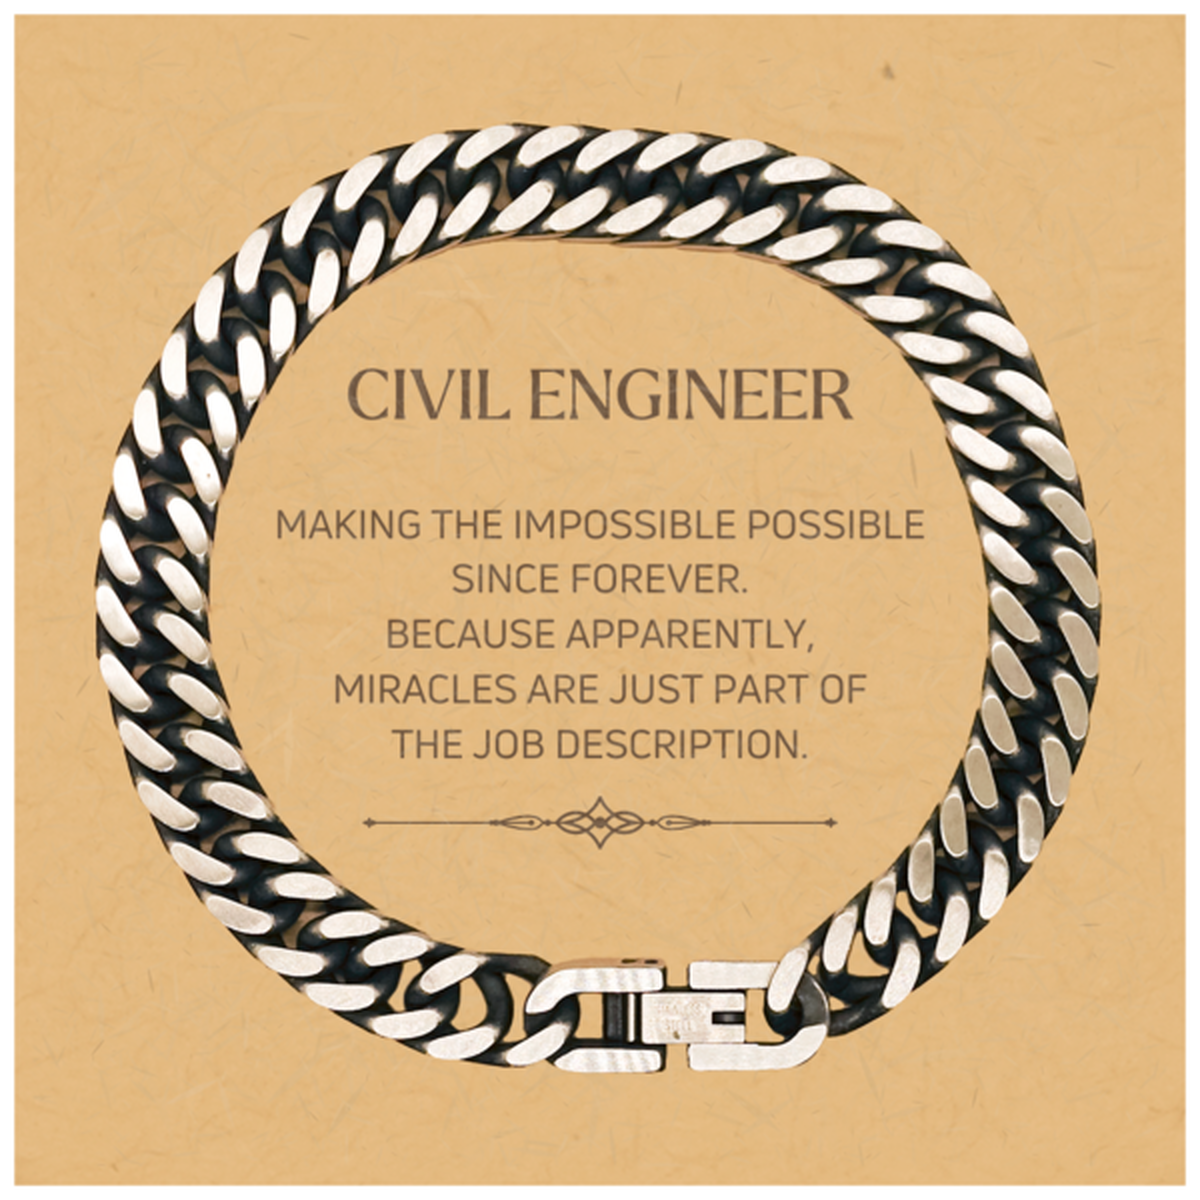 Funny Civil Engineer Gifts, Miracles are just part of the job description, Inspirational Birthday Christmas Cuban Link Chain Bracelet For Civil Engineer, Men, Women, Coworkers, Friends, Boss